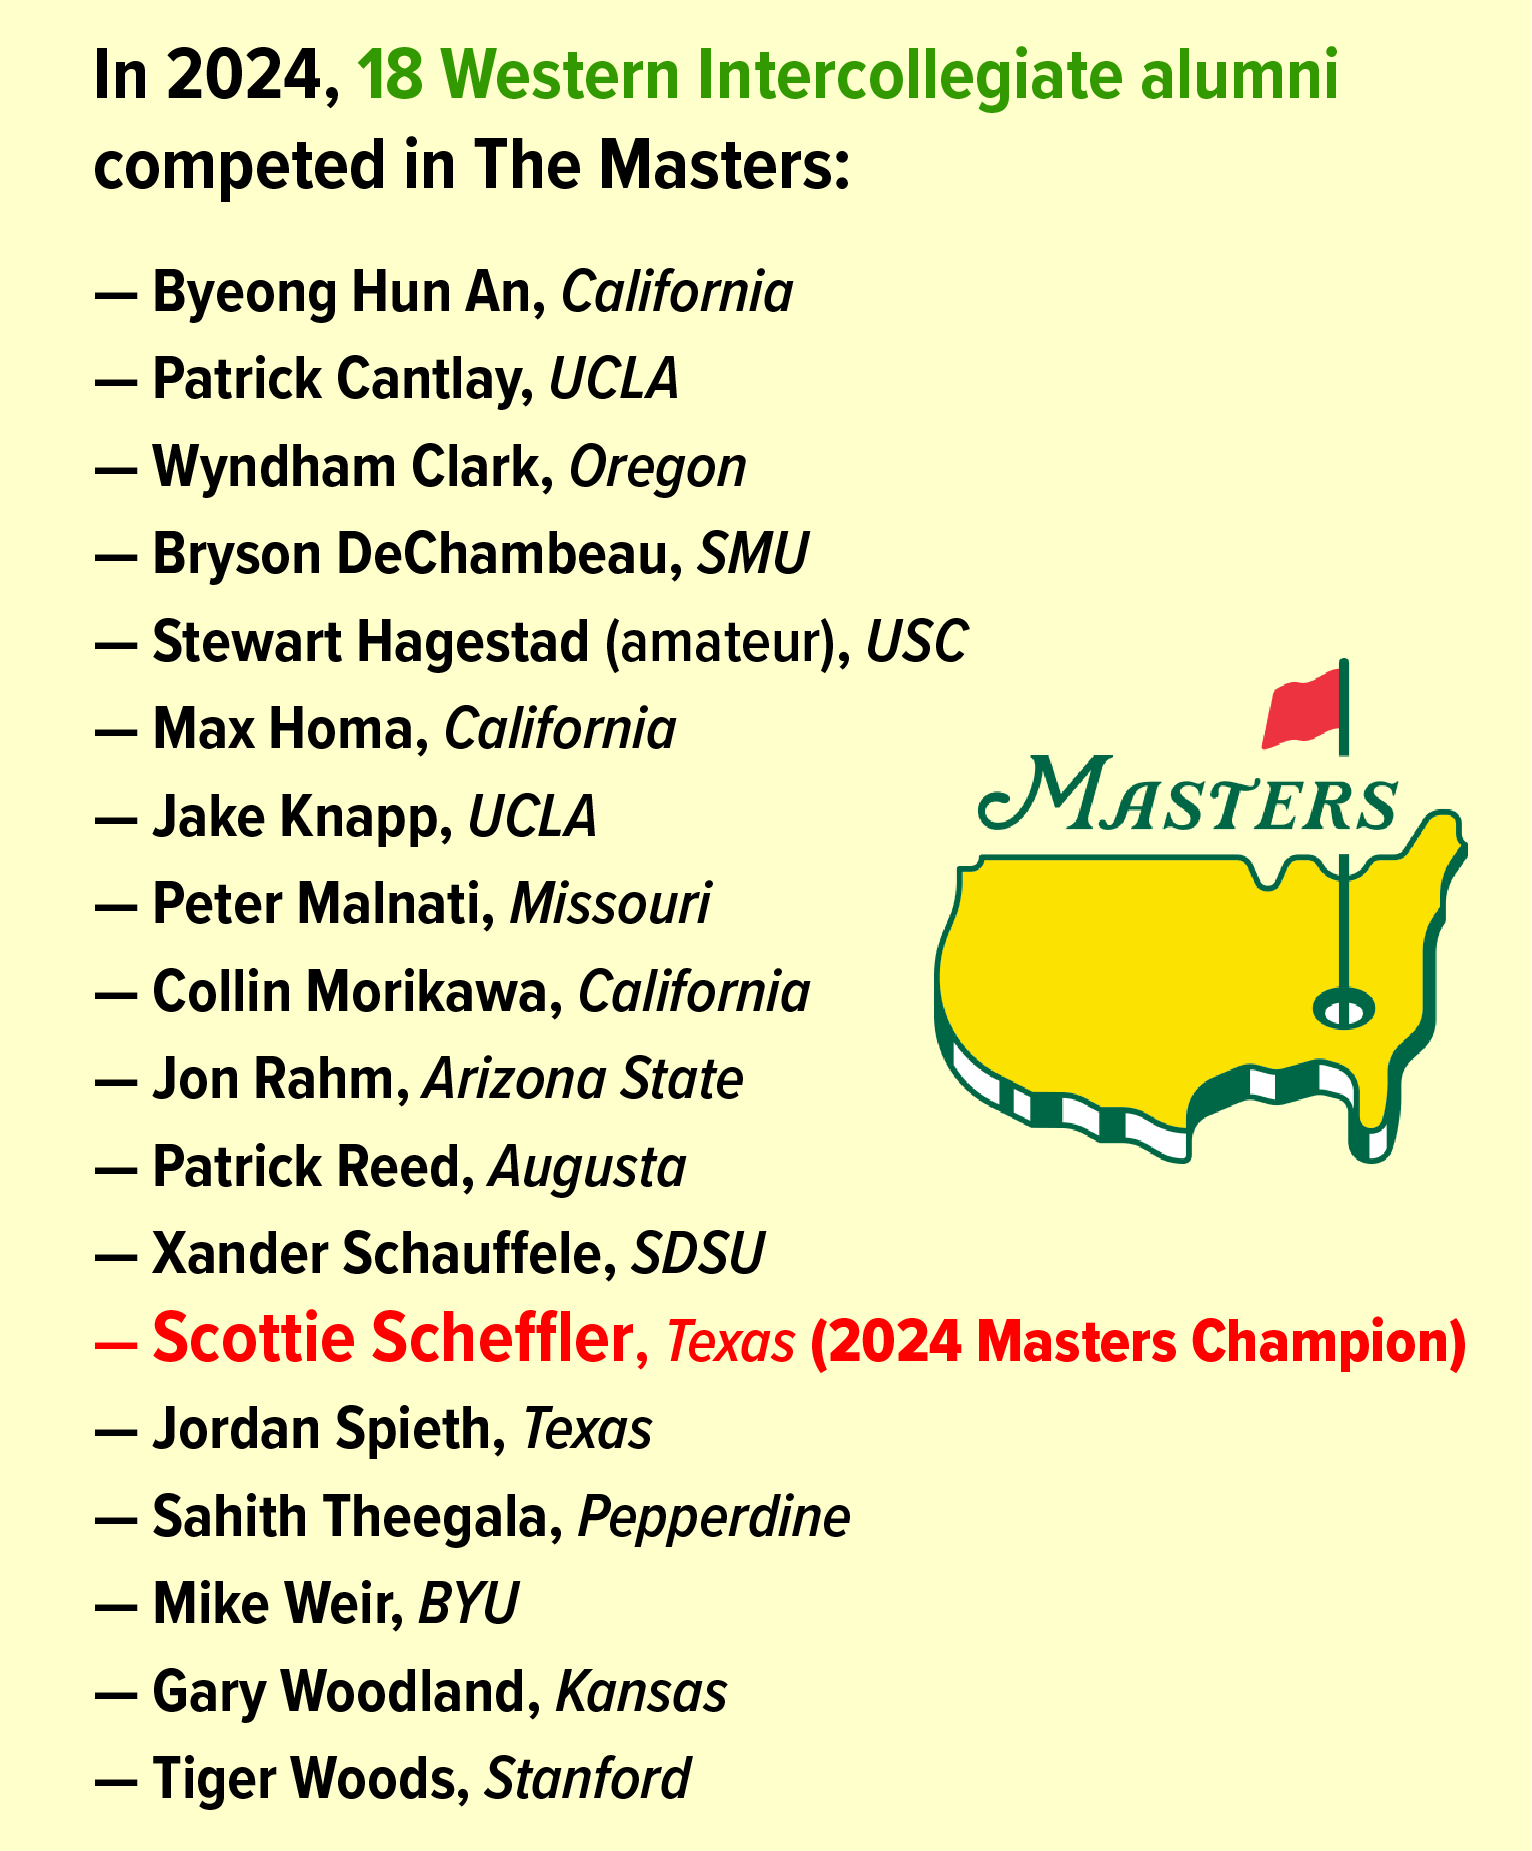 In 2024, 18 Western Intercollegiate alumni competed in The Masters (including 2024 Masters Champion Scottie Scheffler of Texas, and the full list of golfers)